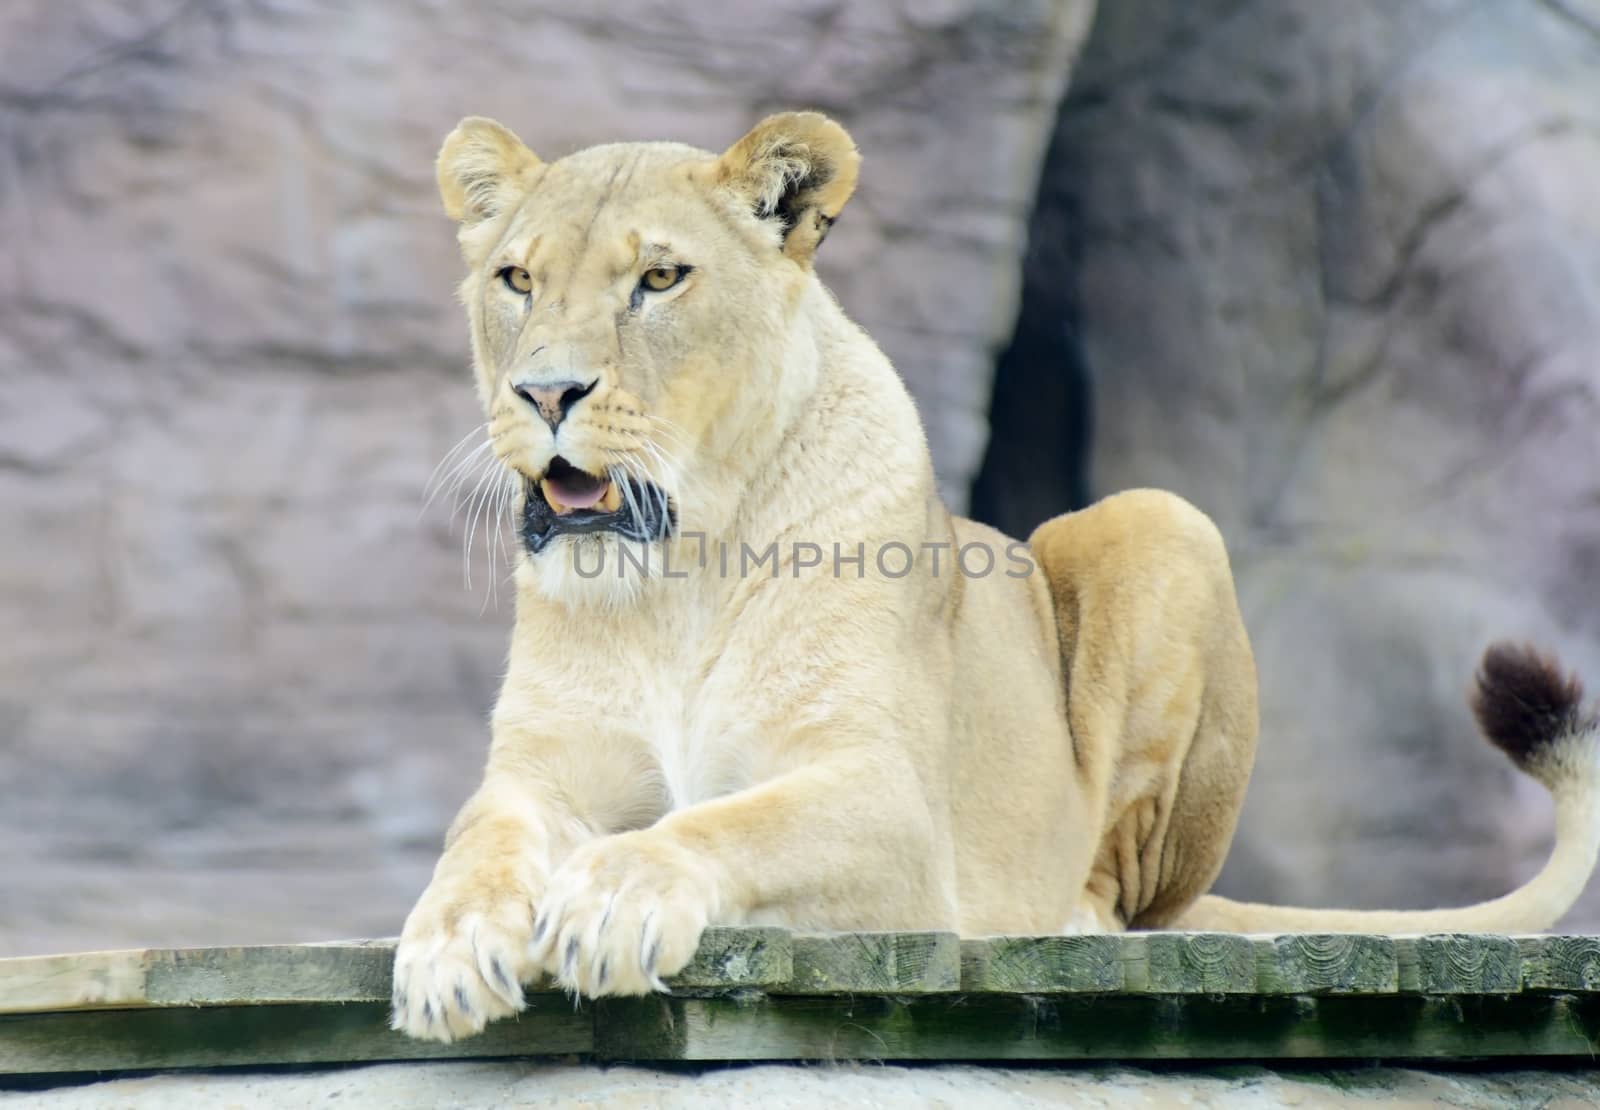 Lioness with mouth open looking alert and dangerous